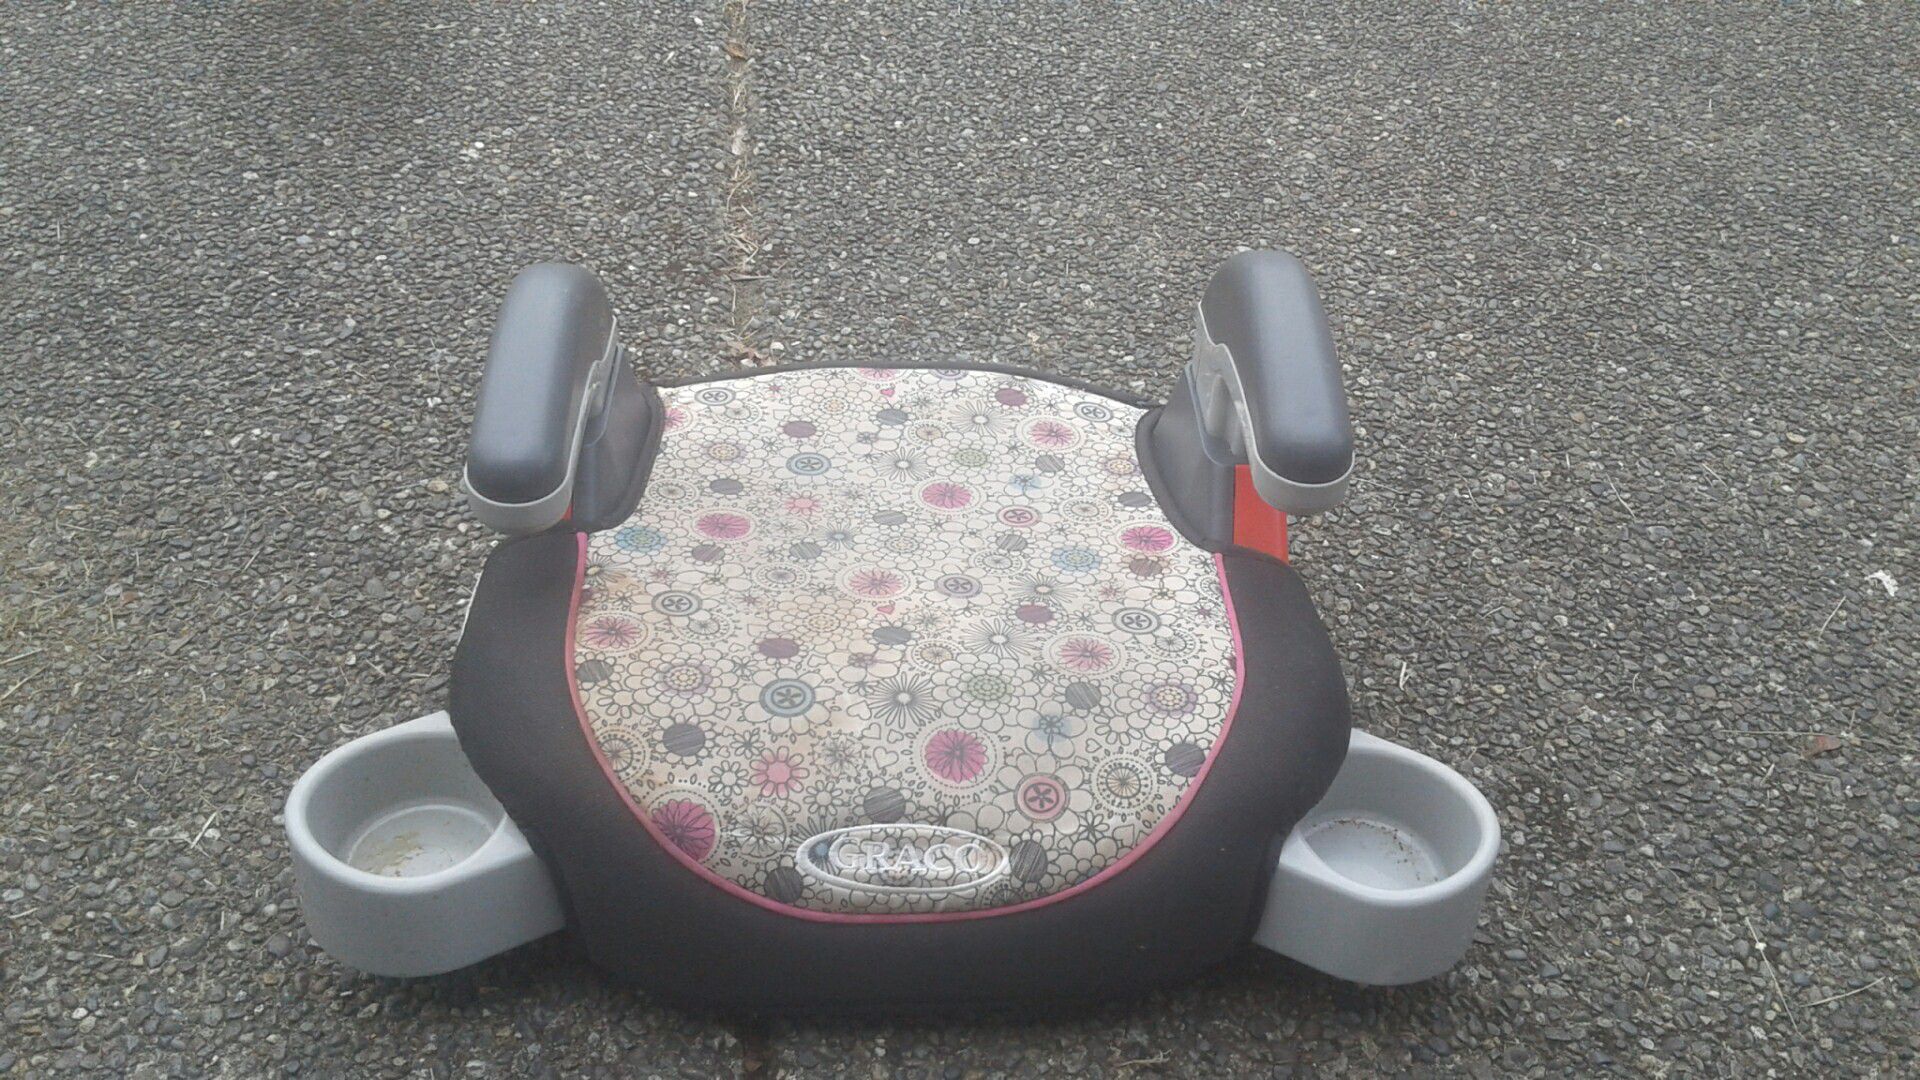 Graco car seat with 2 cup holders